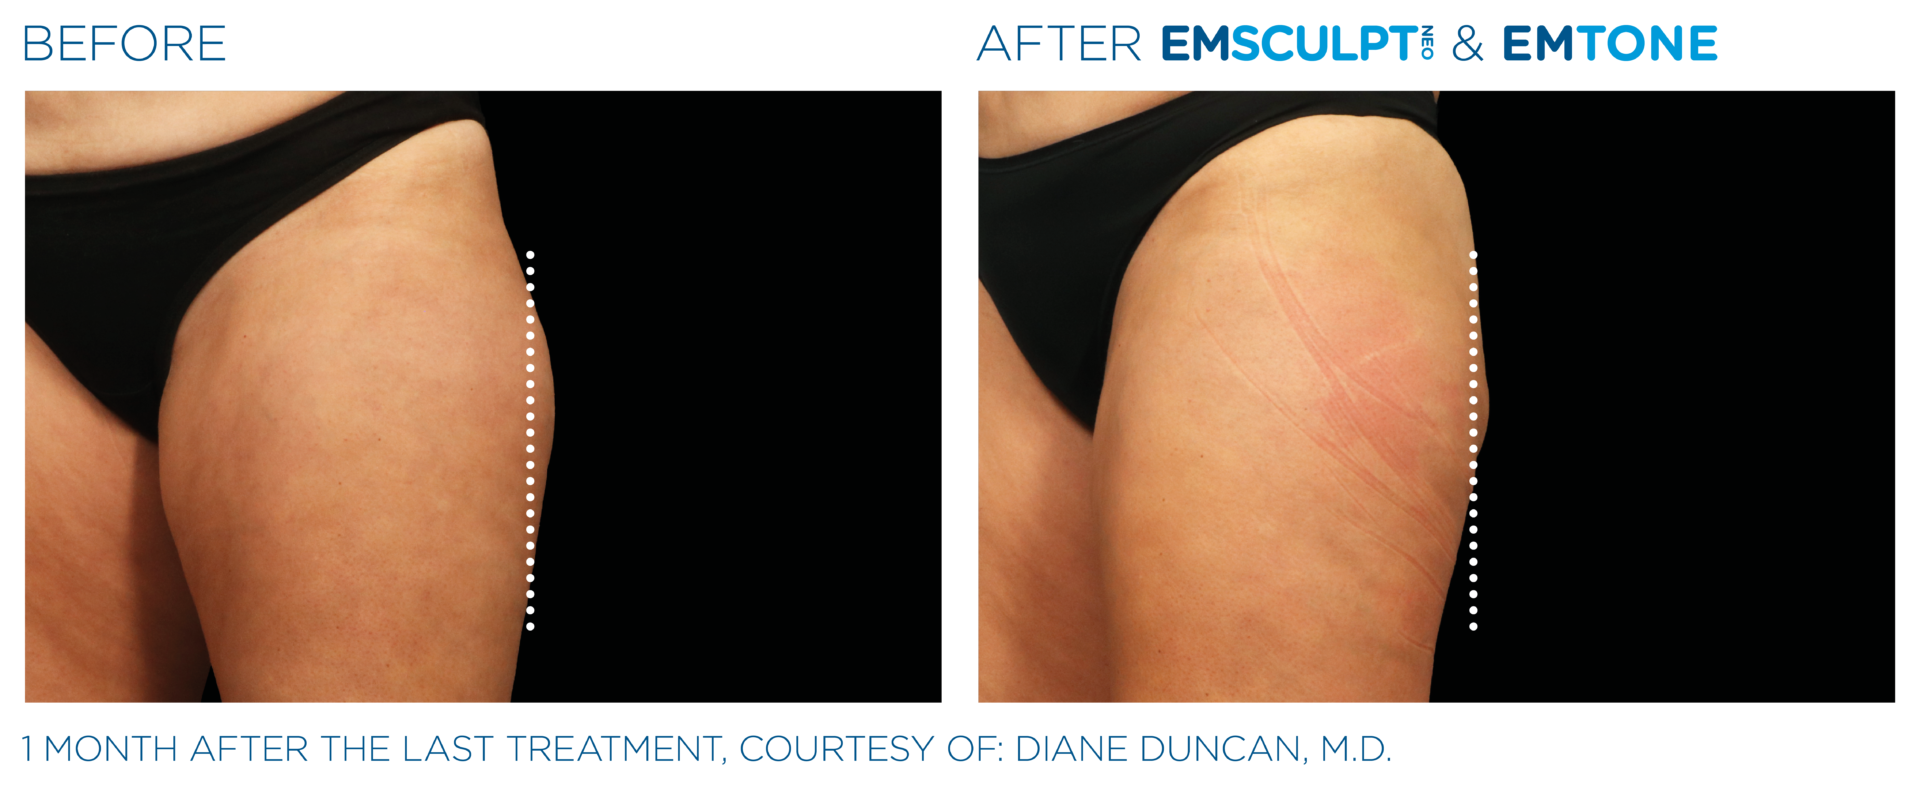 Advertorial: Treating the Inner Thighs with EMSCULPT NEO